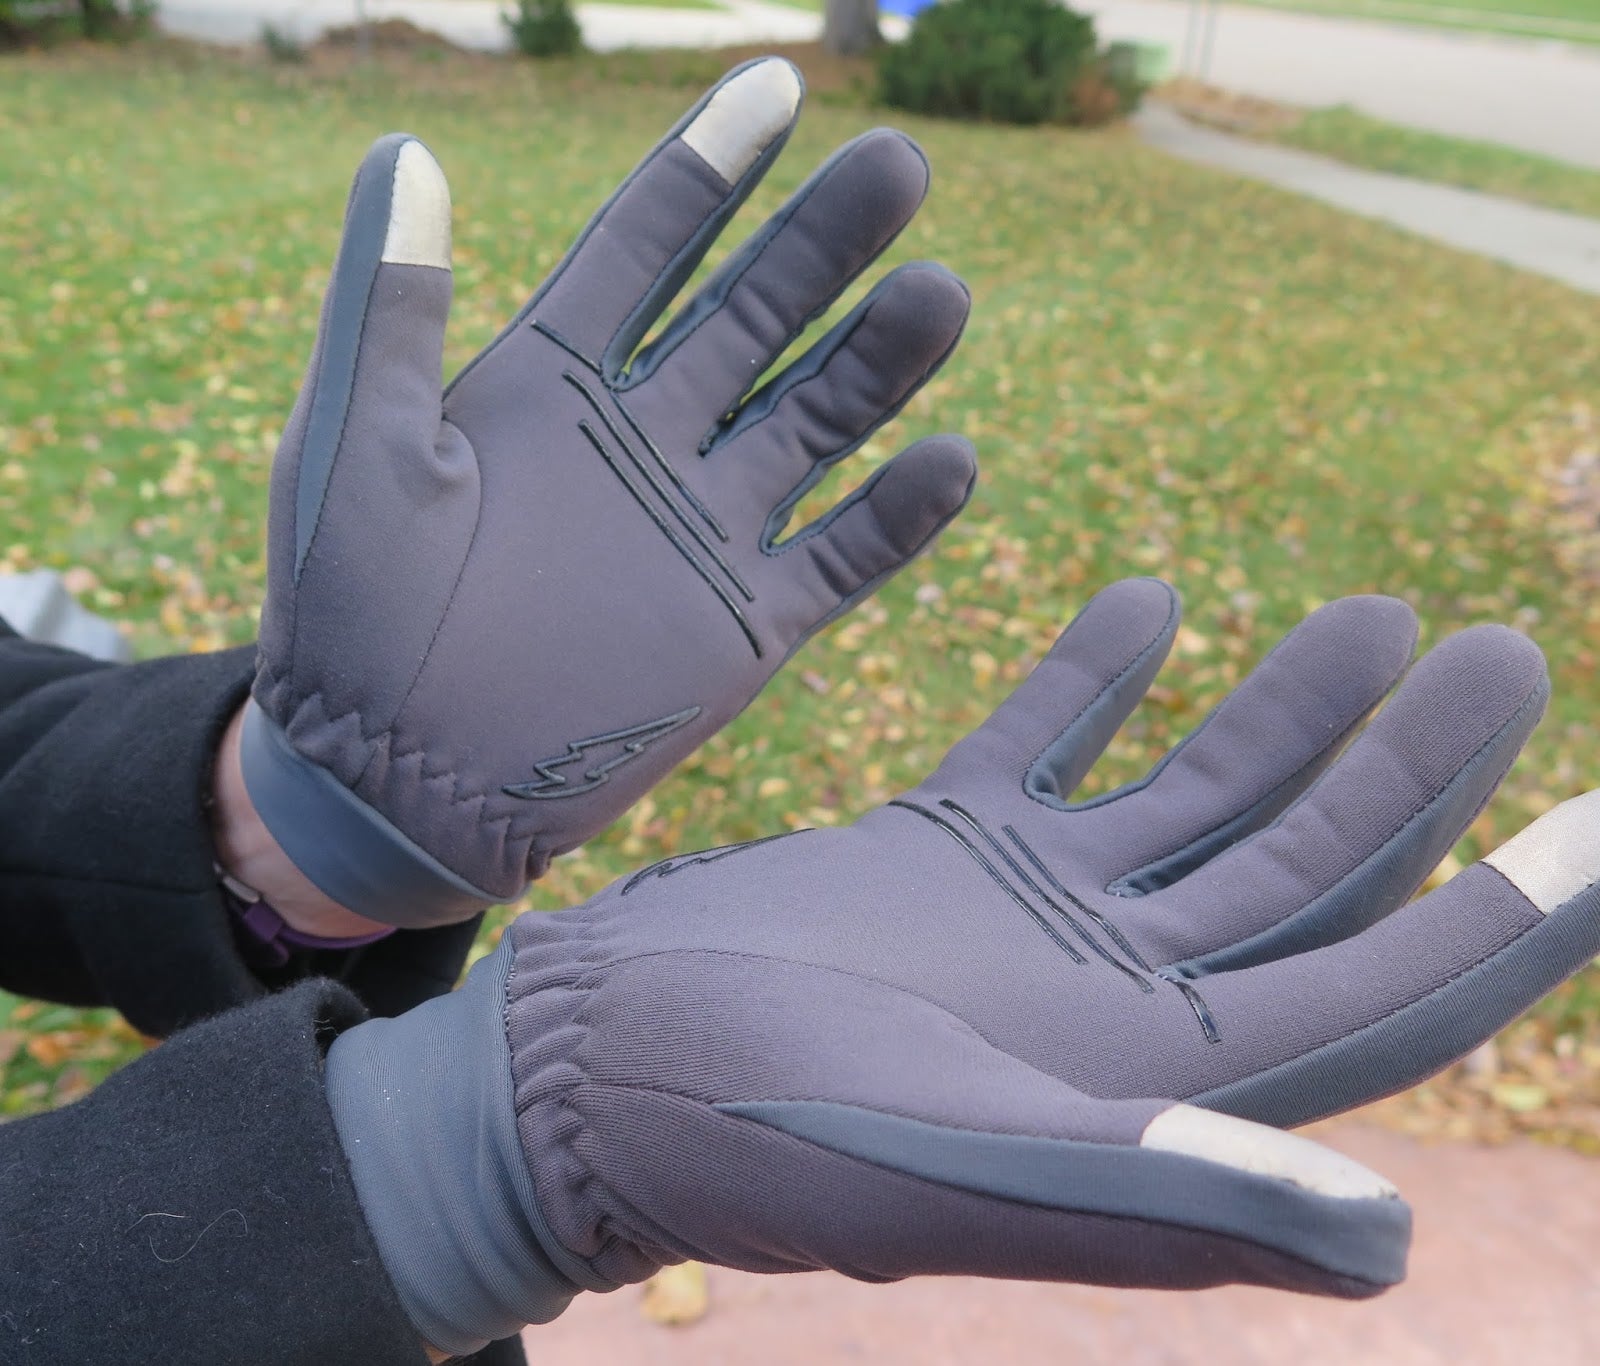 How To Clean The Leather Gloves With Running Water